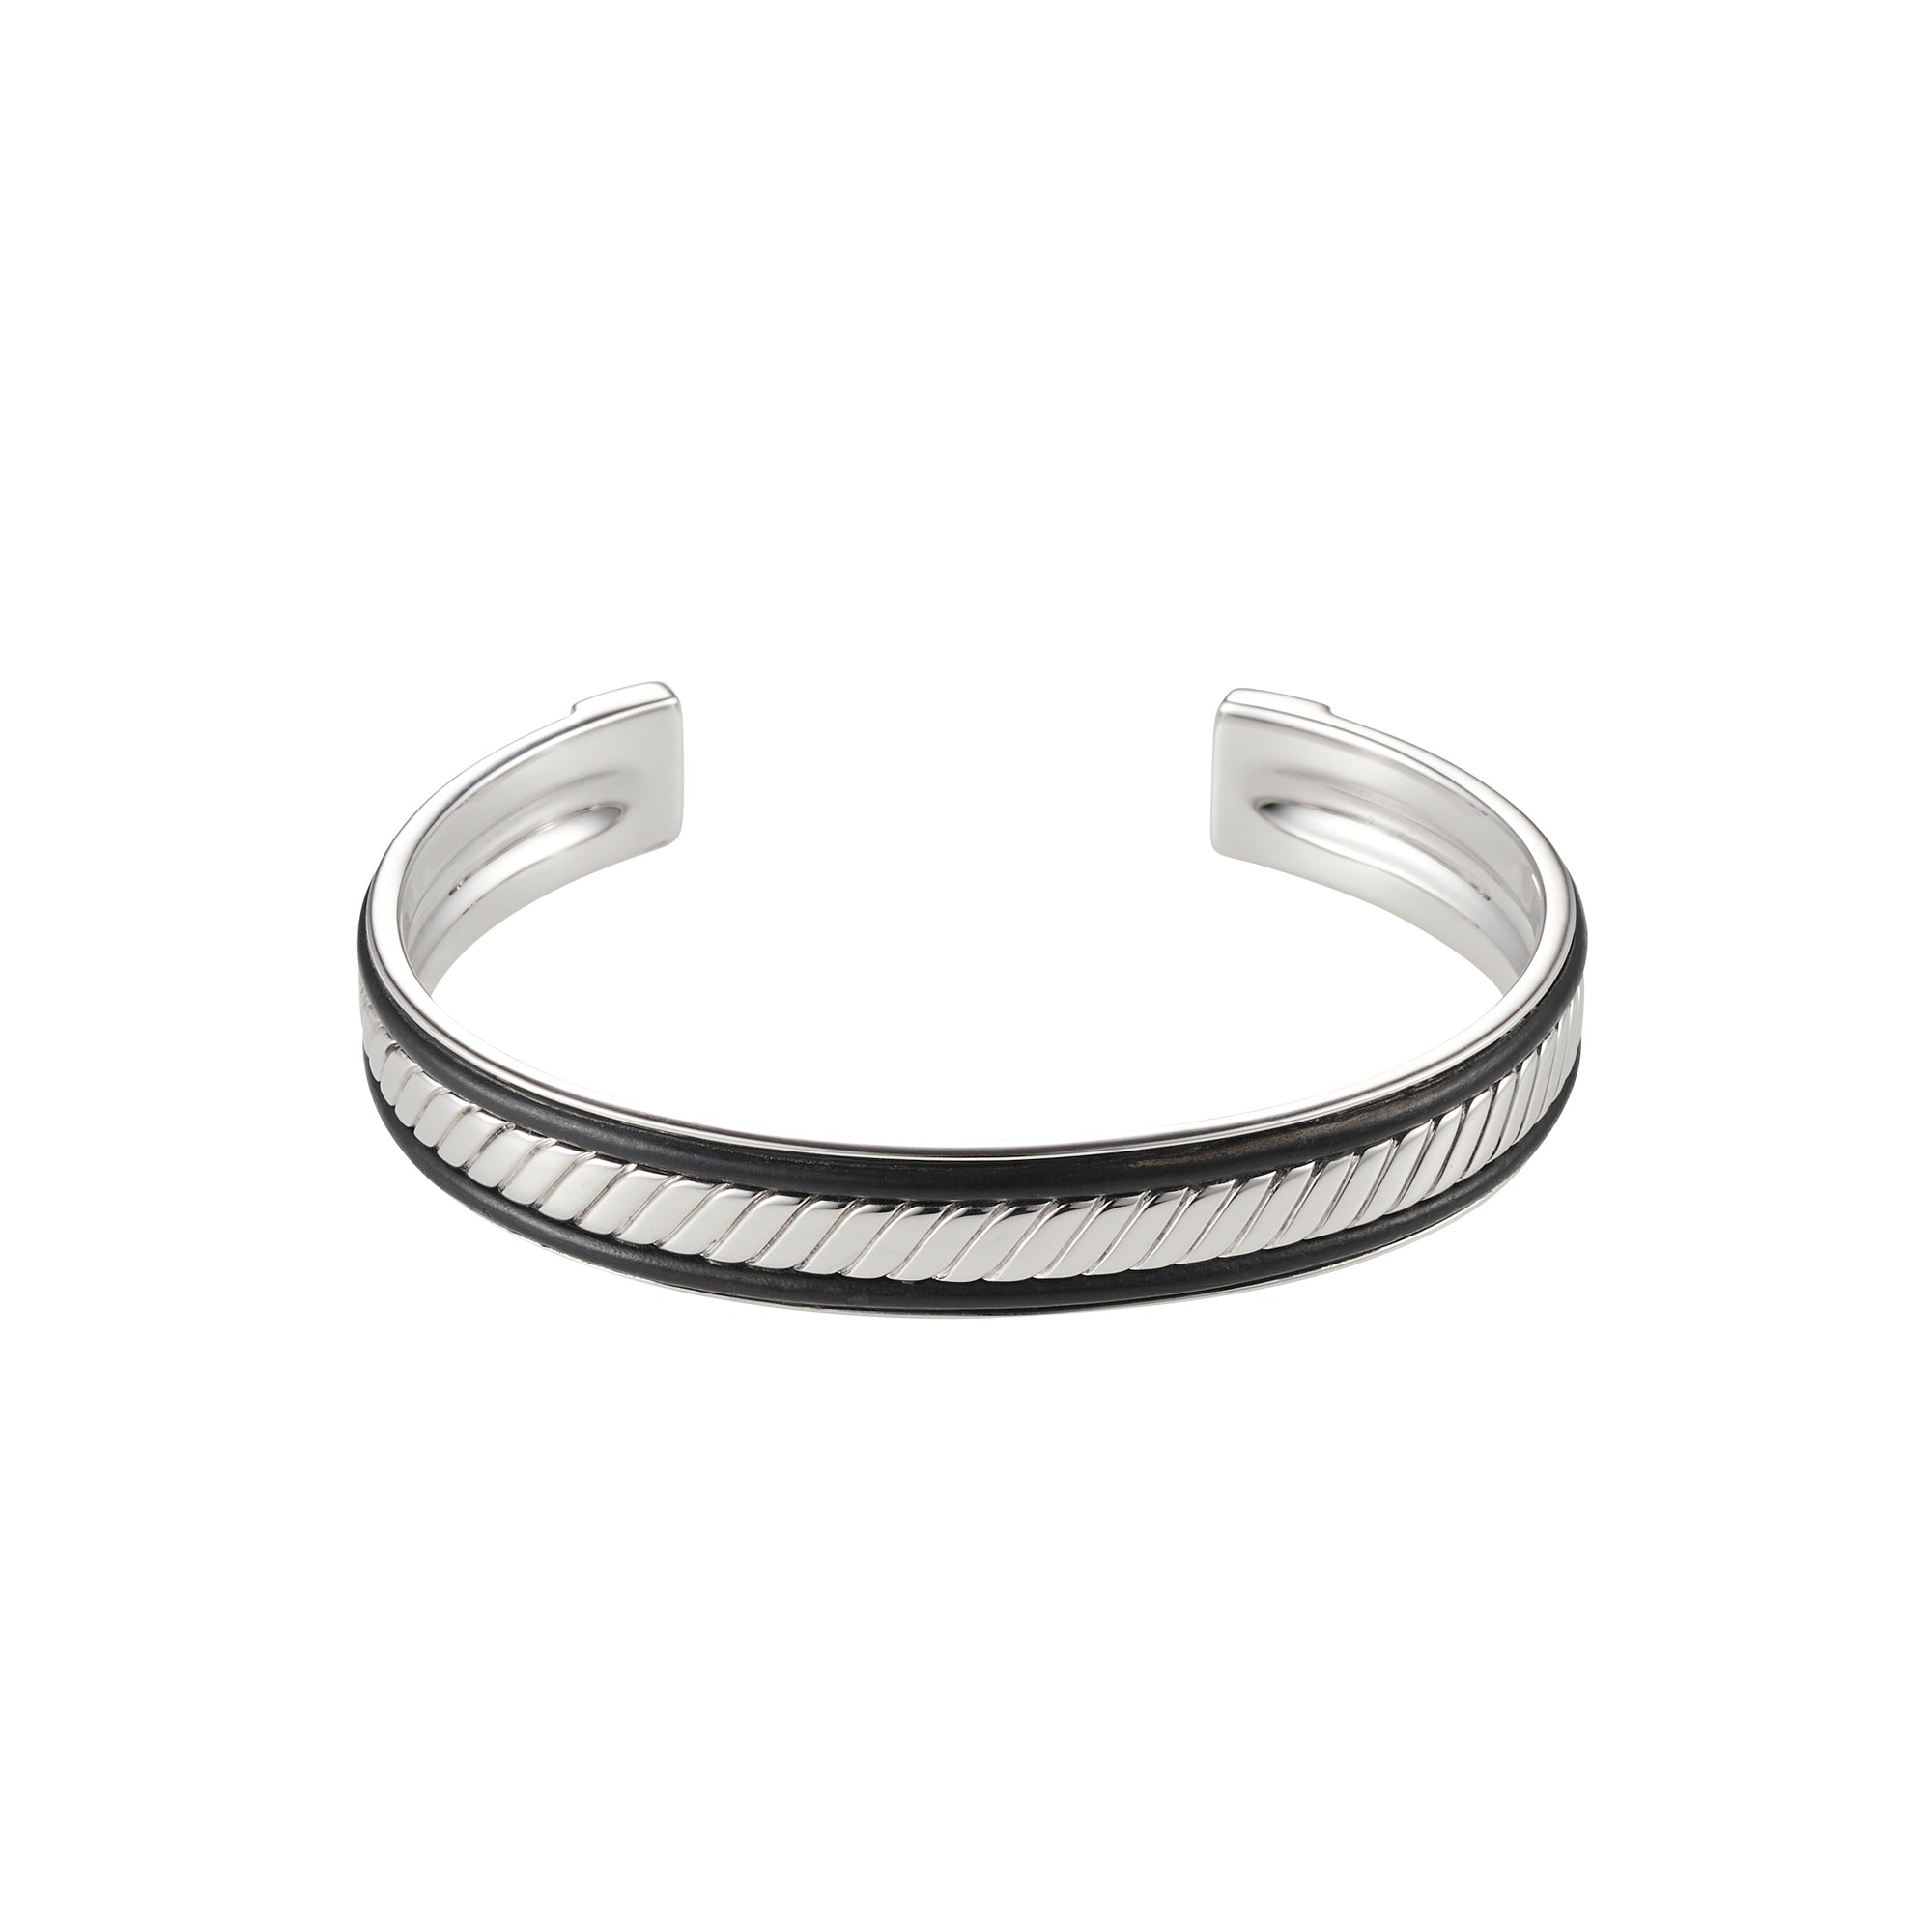 Sterling Silver Cuff Bracelet with Leather Trim